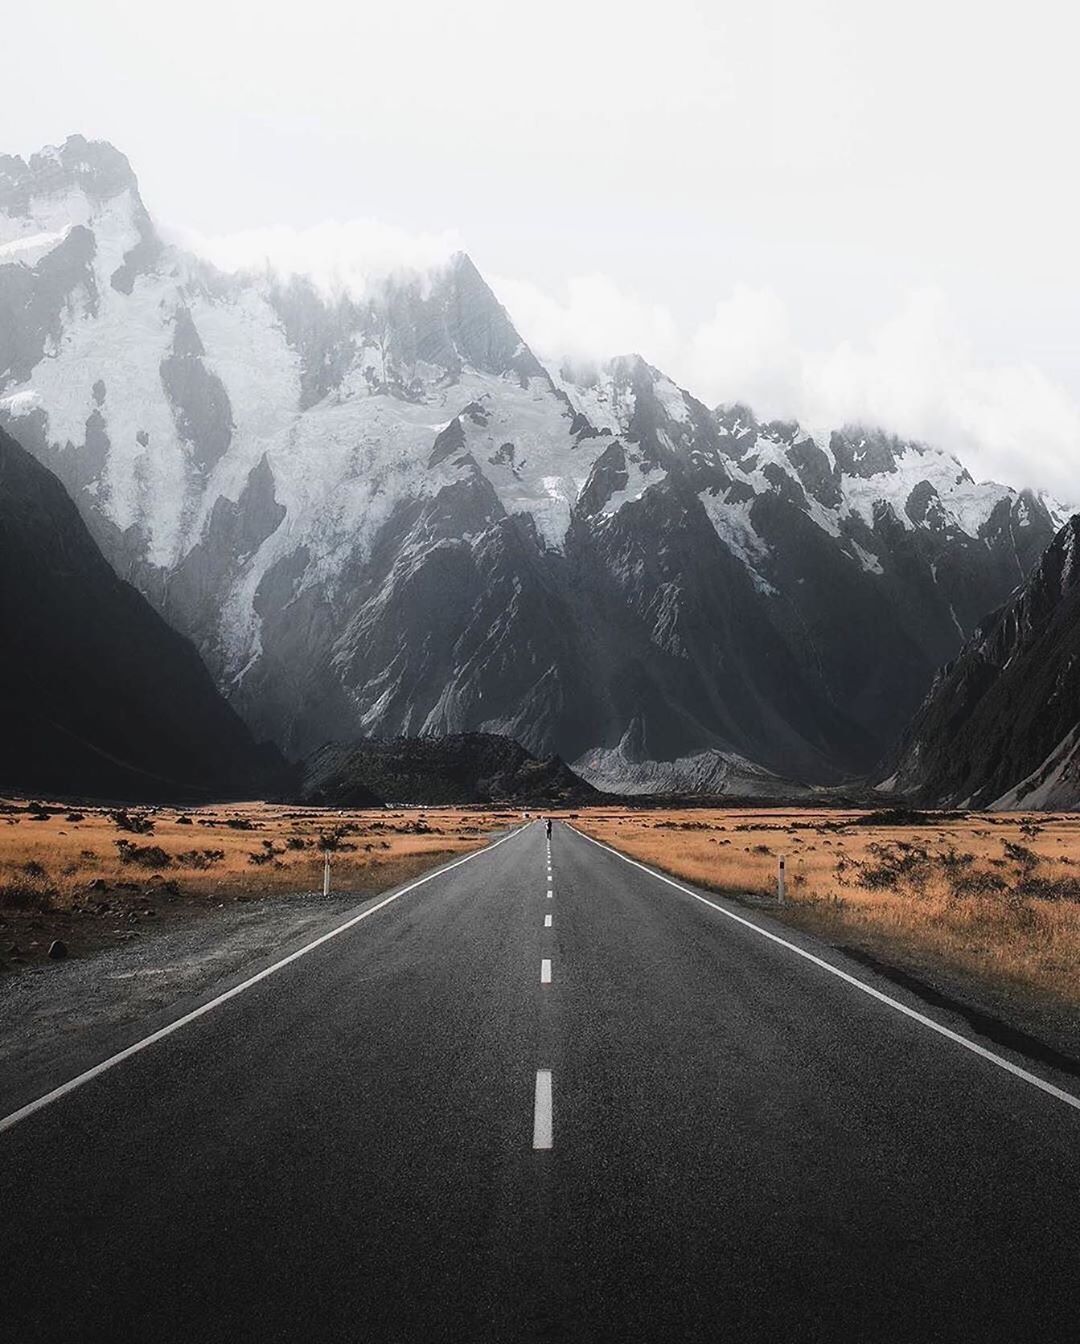 Open Road in Front of a Mountain Range. Photo by Instagram user @earth.all